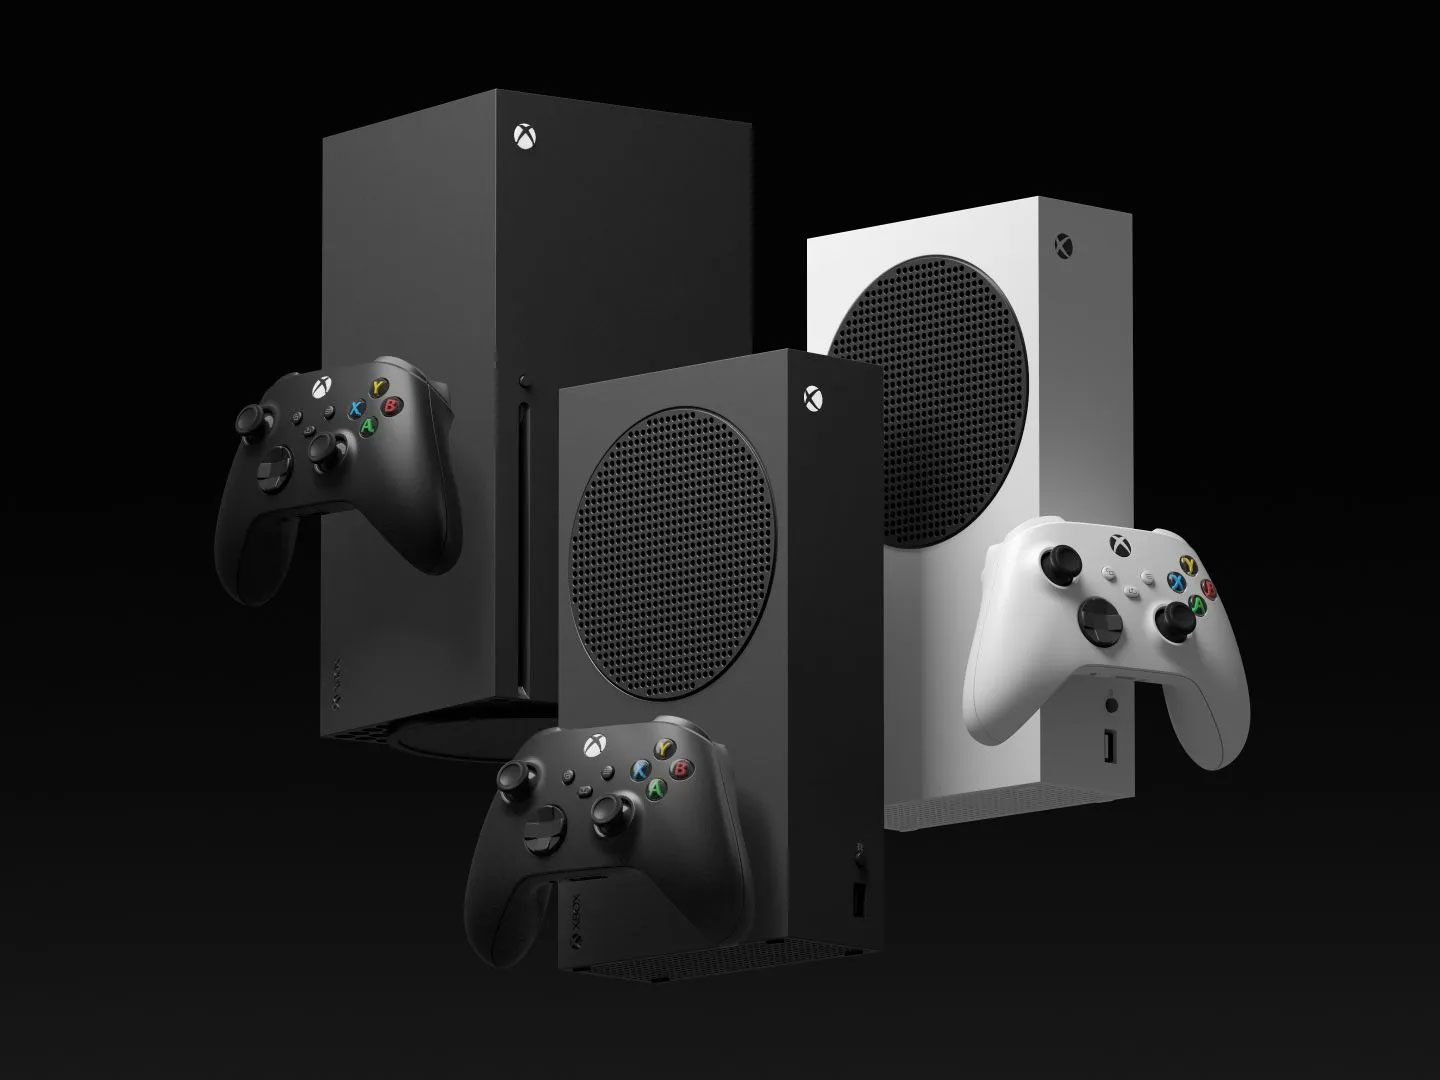 Microsoft is in talks with partners about launching an Xbox mobile